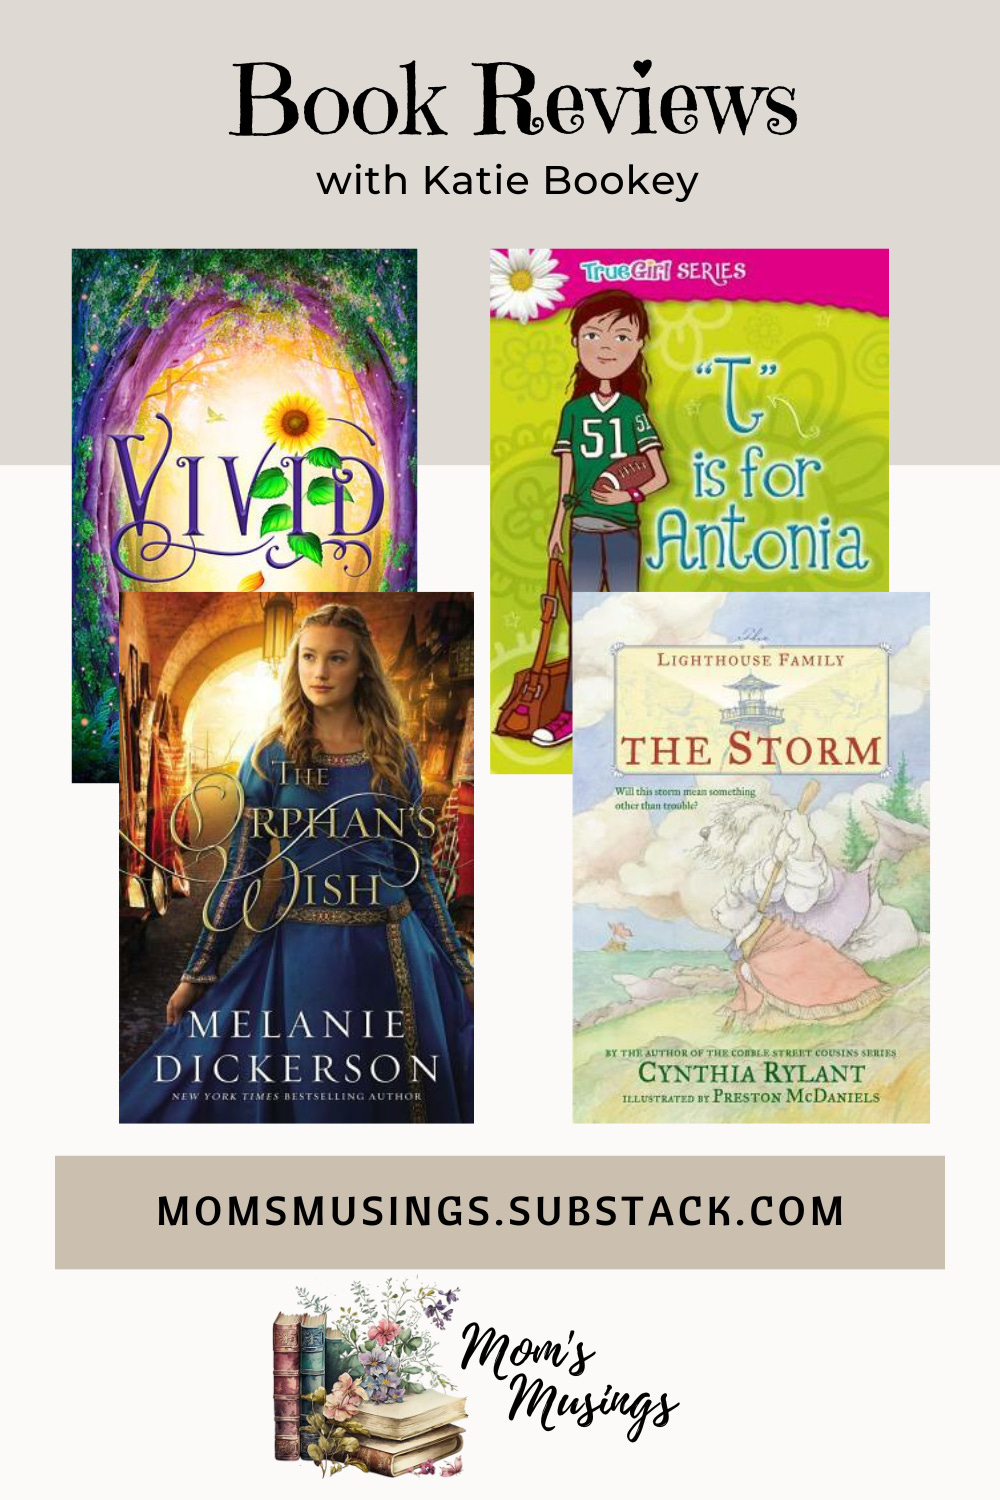 christian book review of vivid, t is for antonia, the orphan's wish, and the storm